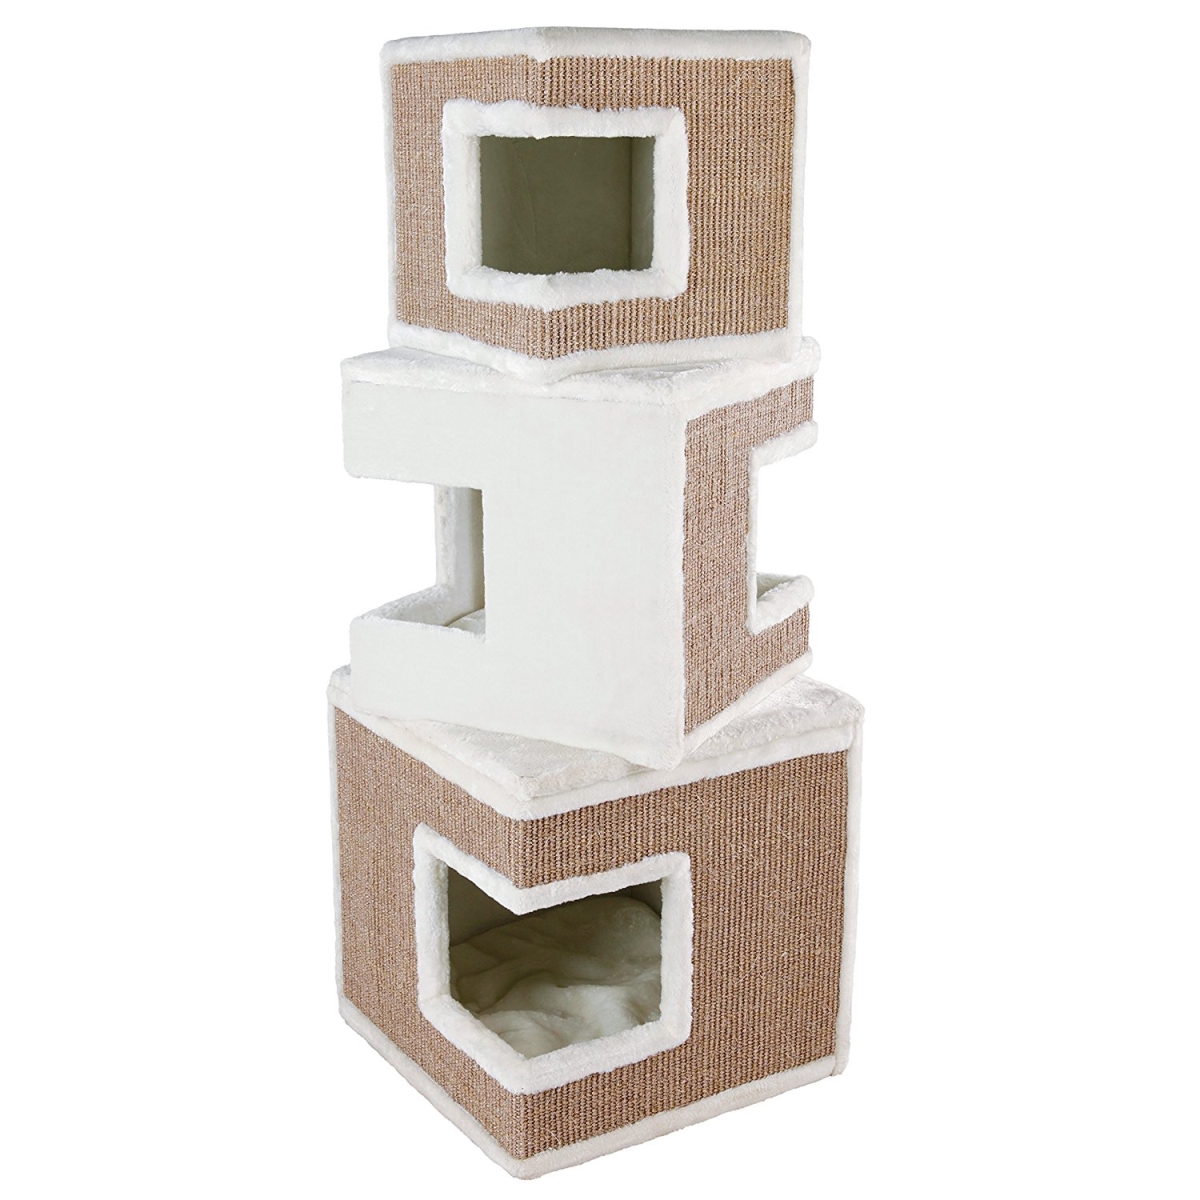 43377 Lilo Modular 3 Story Cat Tower, White & Brown